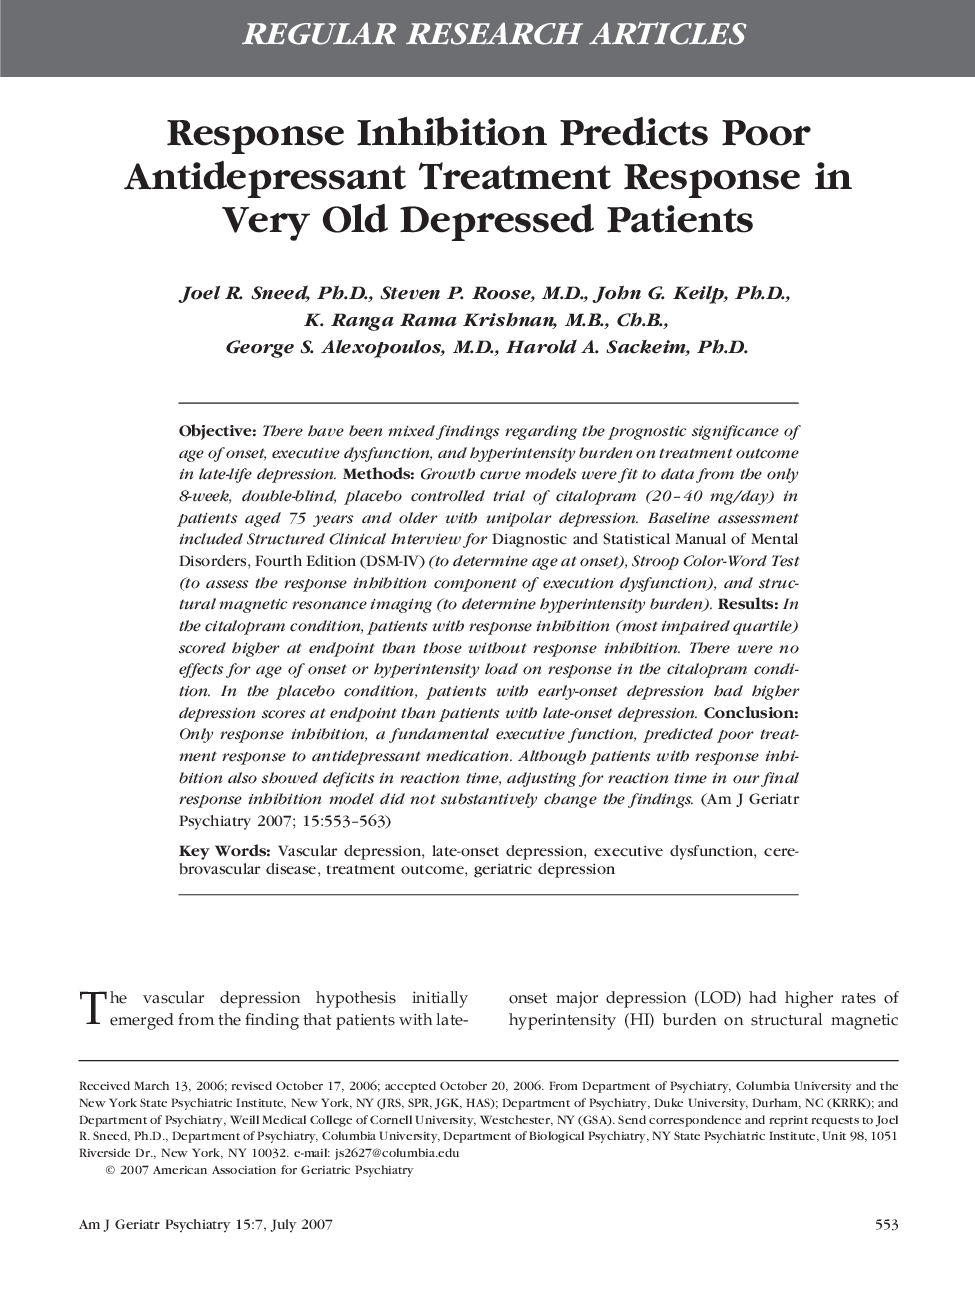 Response Inhibition Predicts Poor Antidepressant Treatment Response in Very Old Depressed Patients